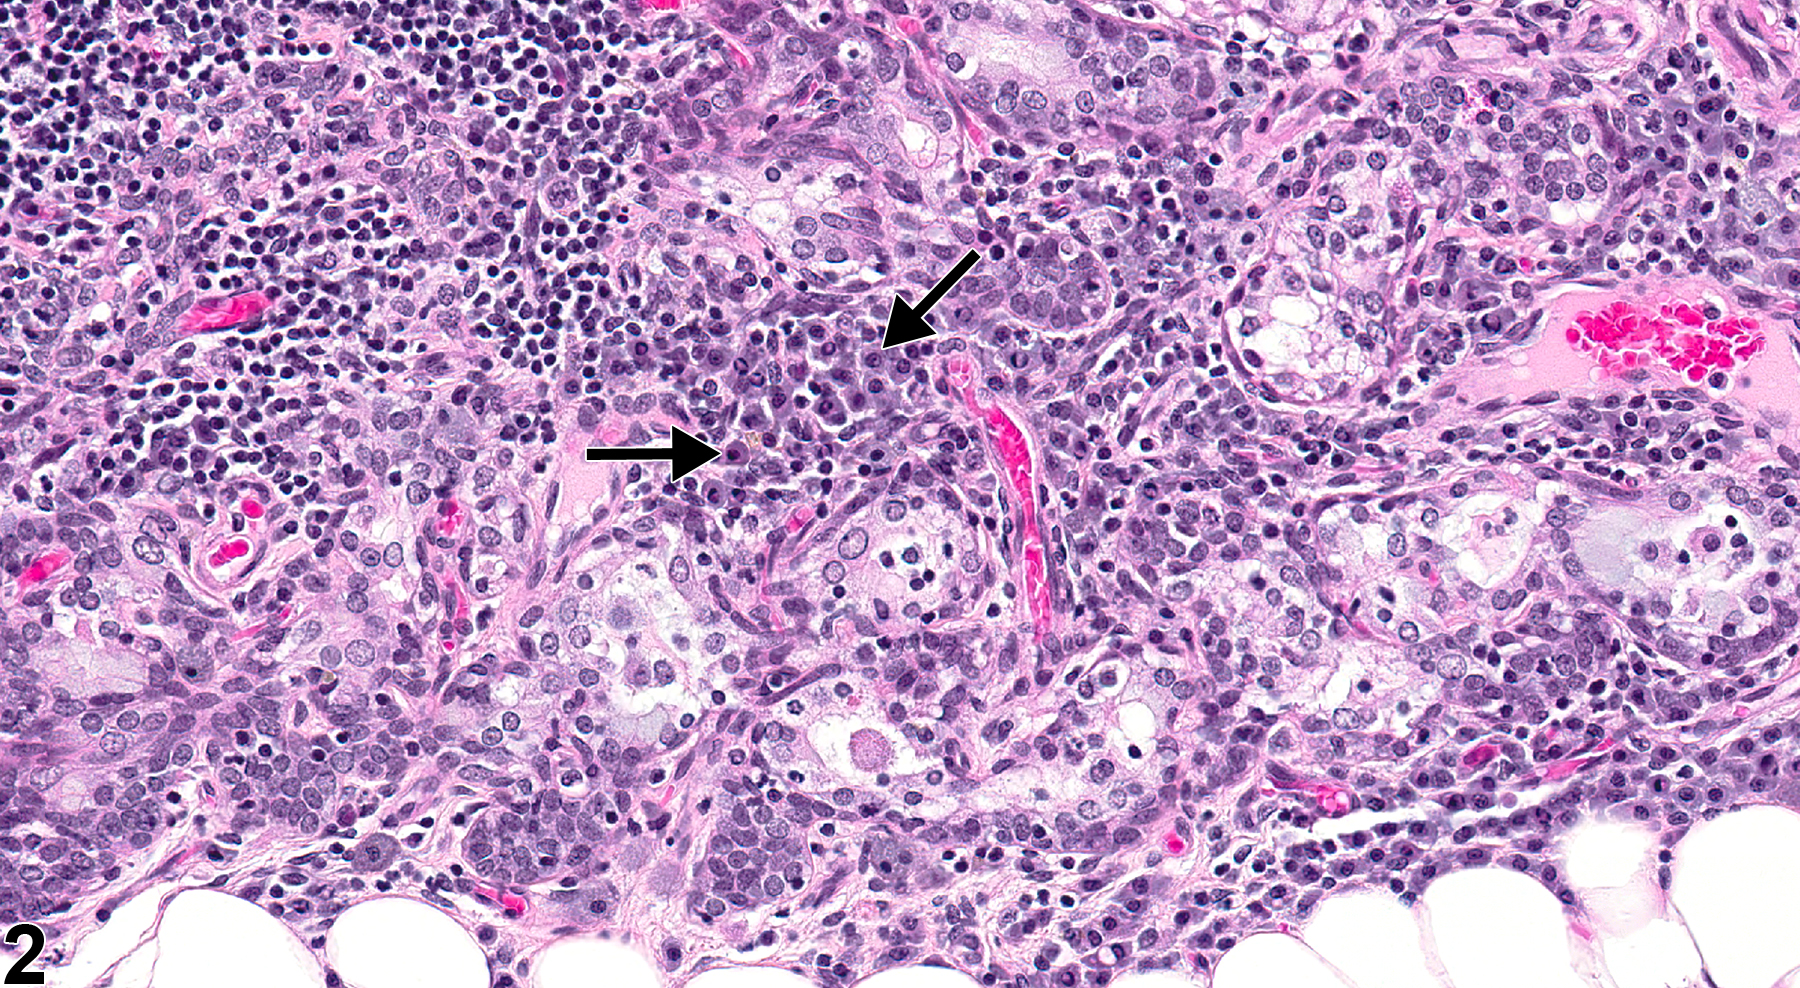 Image of involution in the thymus from a female Harlan Sprague-Dawley rat in a chronic study